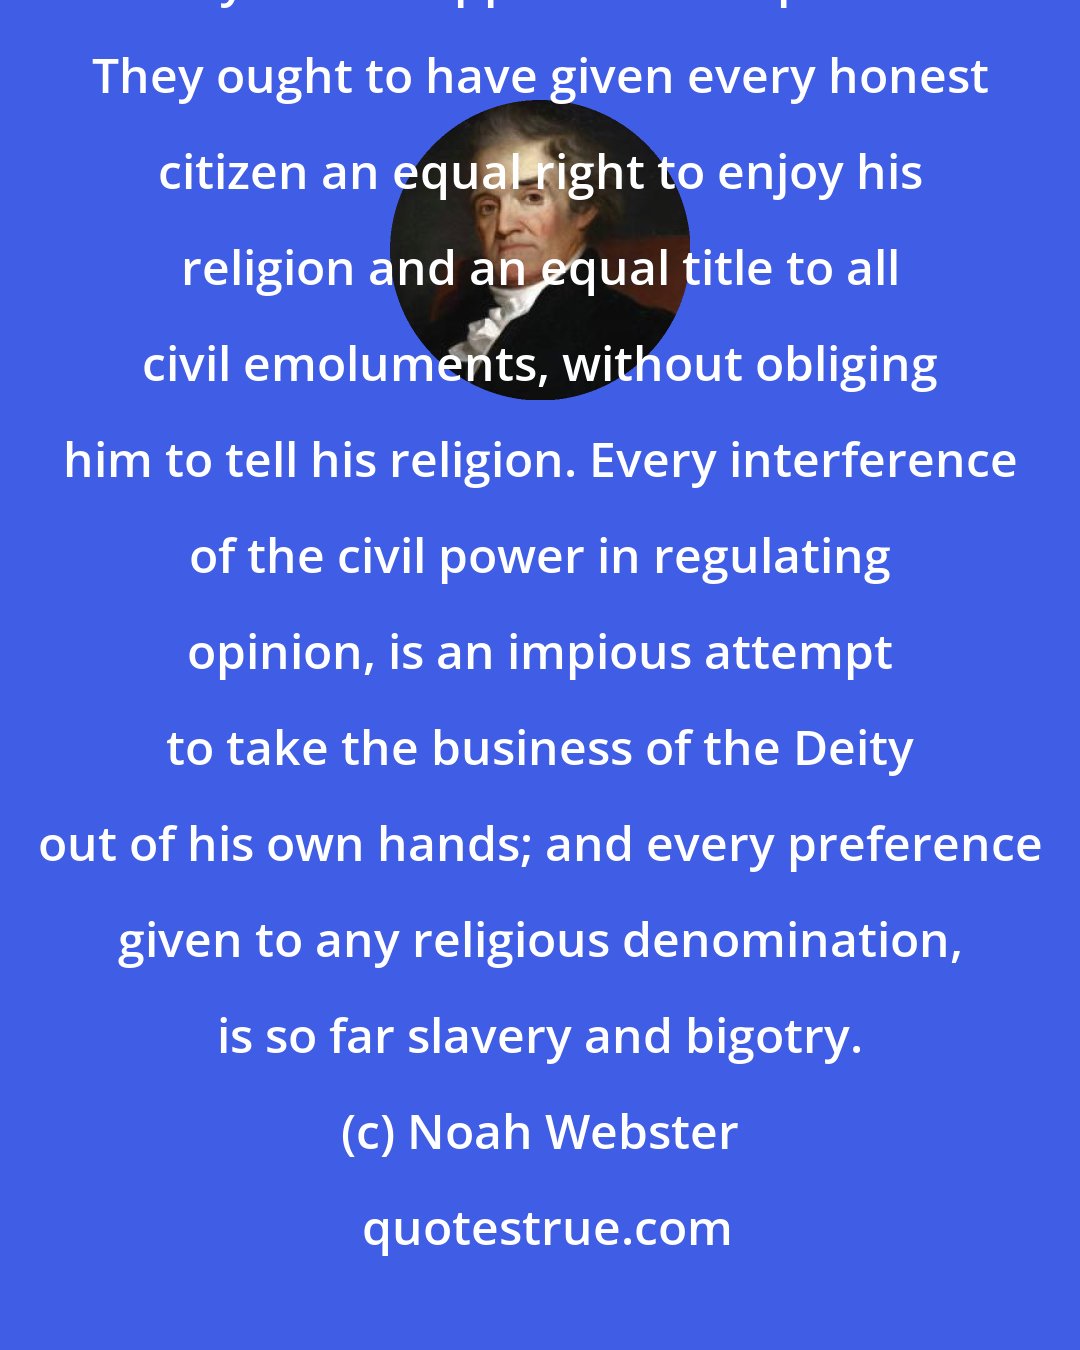 Noah Webster: The American states have gone far in assisting the progress of truth; but they have stopped short of perfection. They ought to have given every honest citizen an equal right to enjoy his religion and an equal title to all civil emoluments, without obliging him to tell his religion. Every interference of the civil power in regulating opinion, is an impious attempt to take the business of the Deity out of his own hands; and every preference given to any religious denomination, is so far slavery and bigotry.